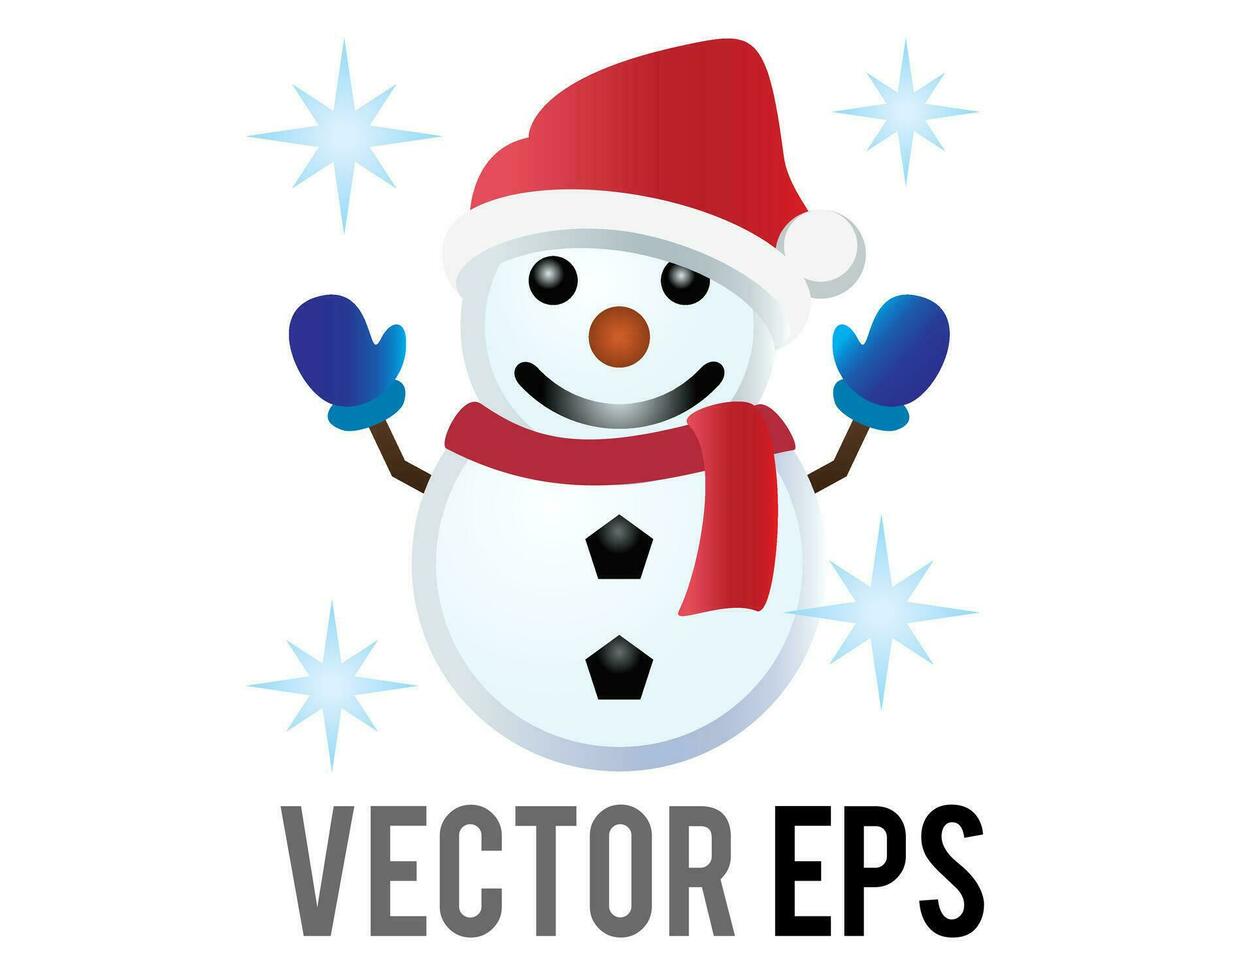 Vector classic snowman made from two large snowballs icon with christmas hat and scraf